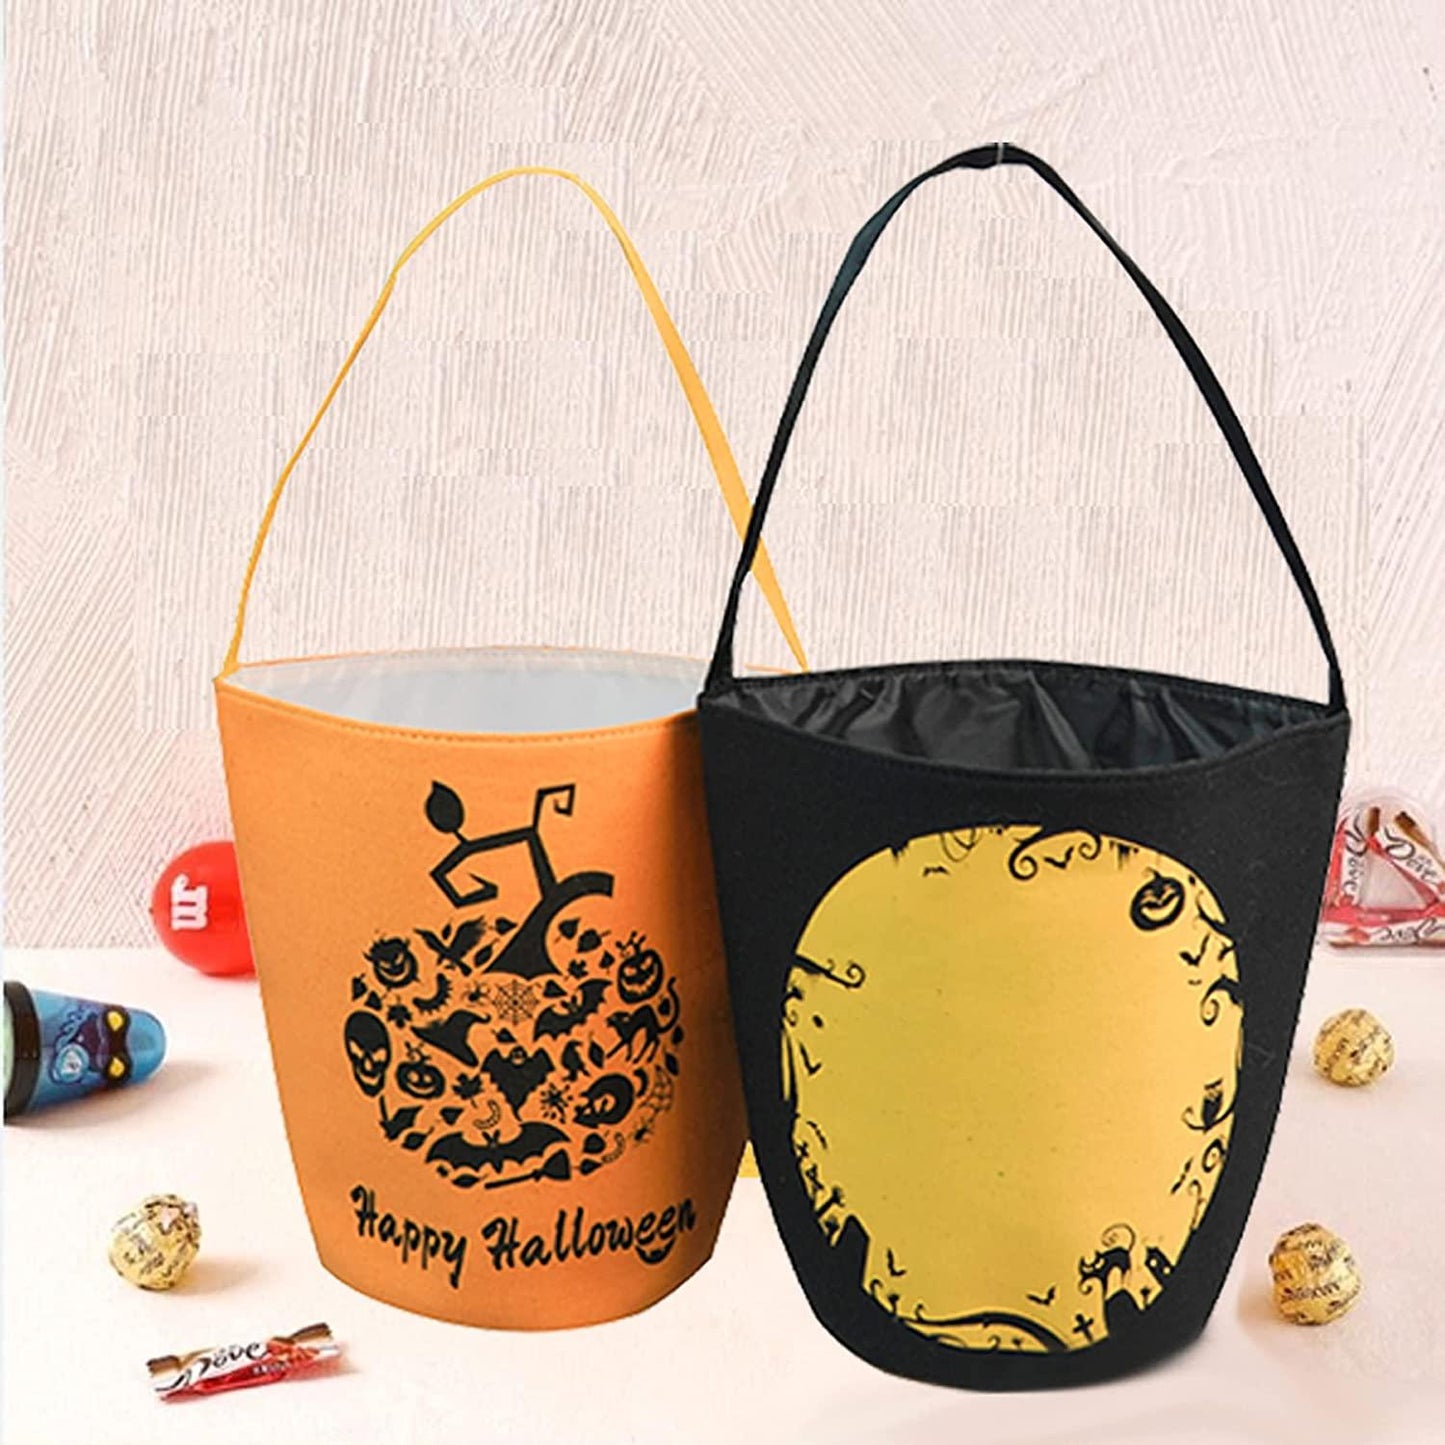 Halloween Trick or Treat Bag, Pumpkin Canvas Candy Tote Bucket - If you say i do